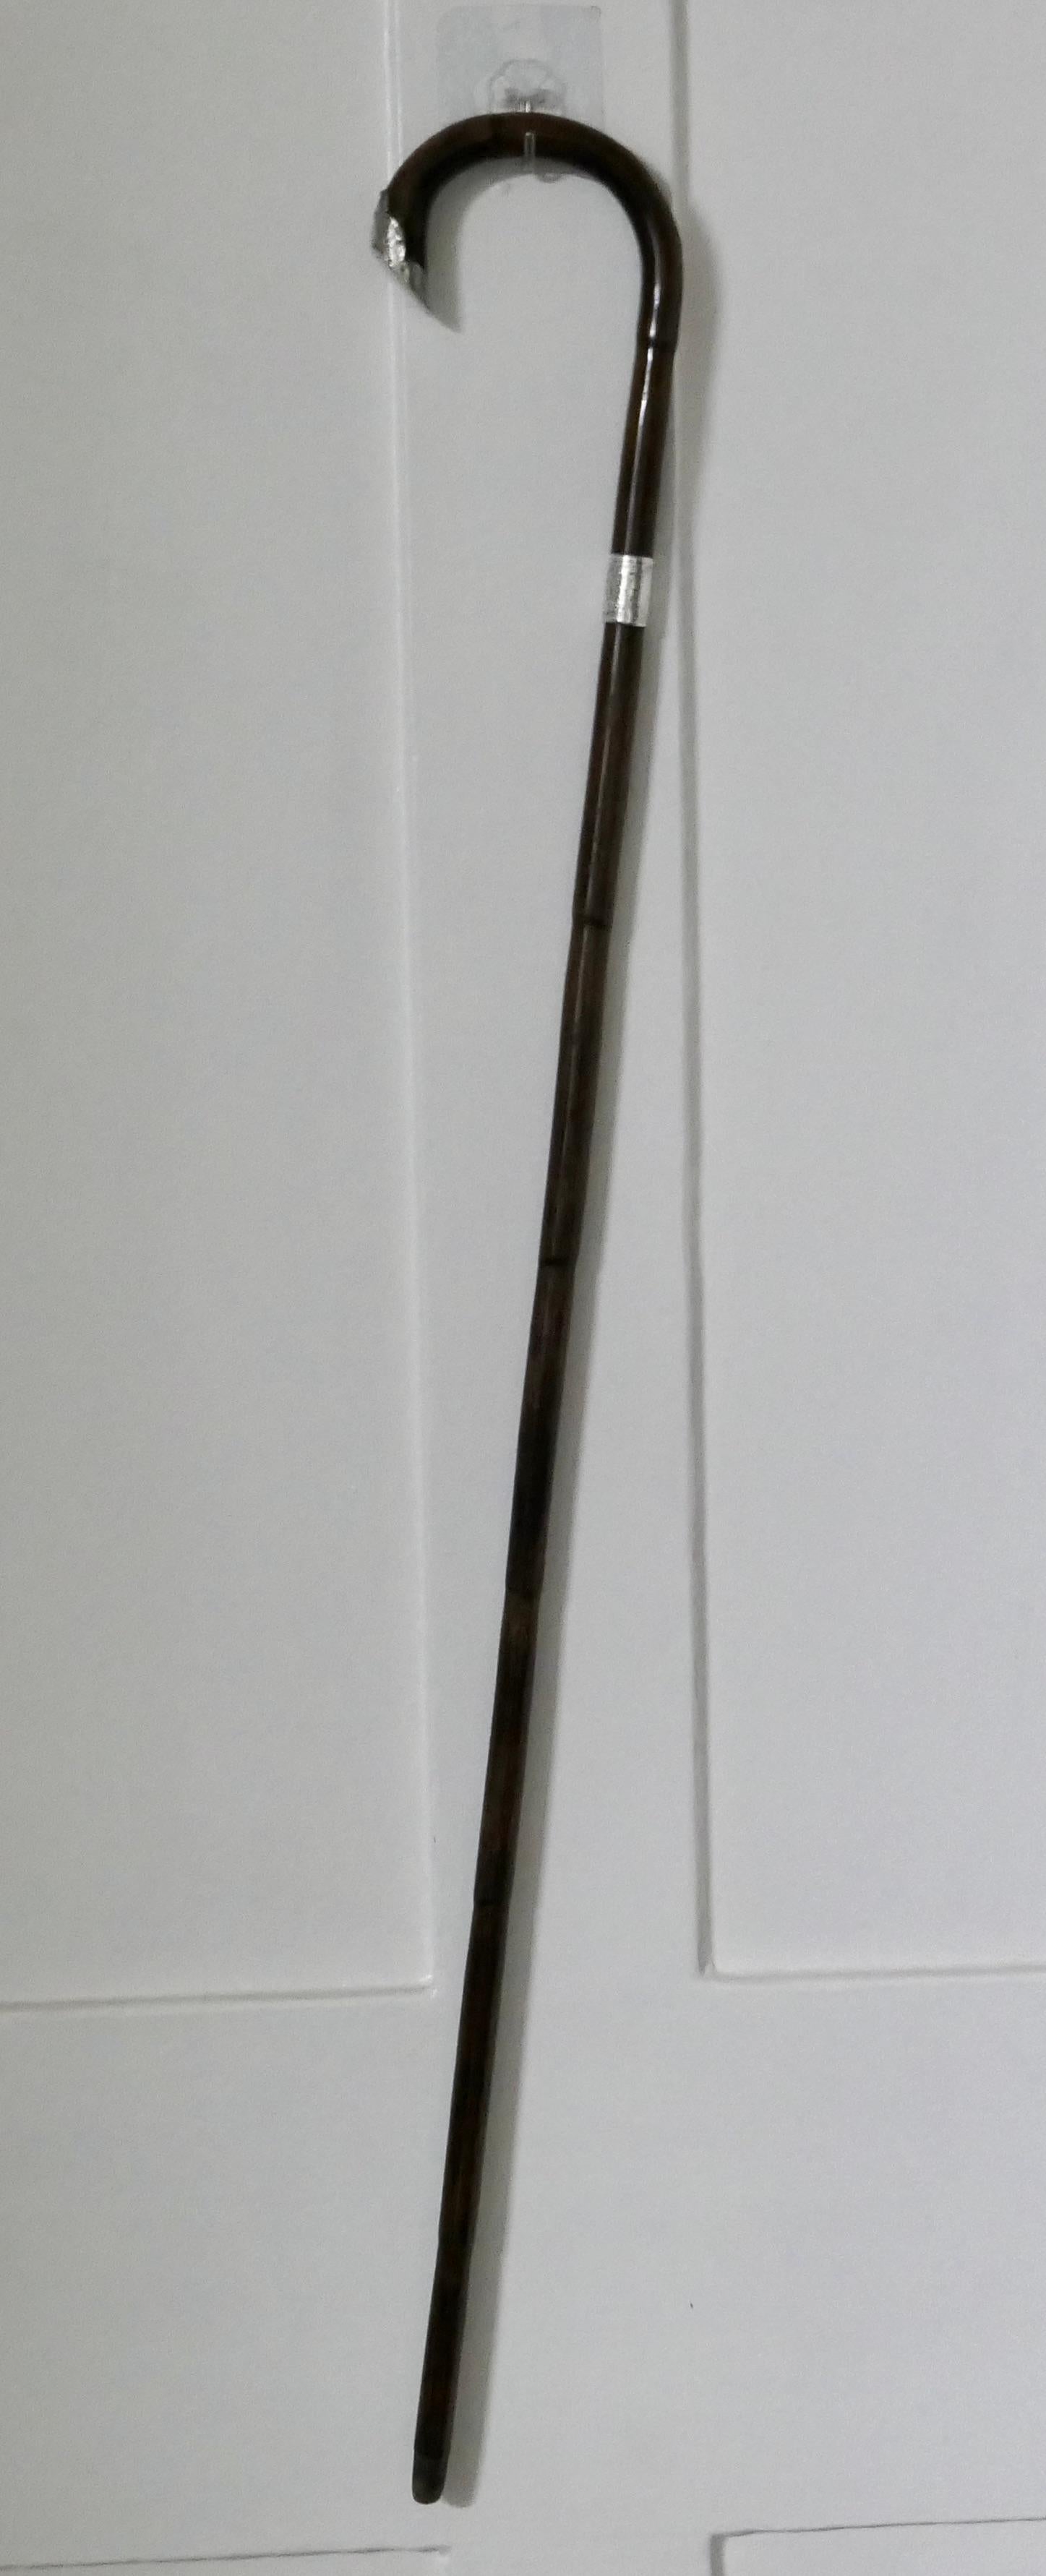 Good Bamboo walking stick with silver hall marked collar & handle.

The Cane dates from 1900 is in good antique condition a little wear to the Silver collar and general wear consistent with age.

The cane is 36” long 
GF84.